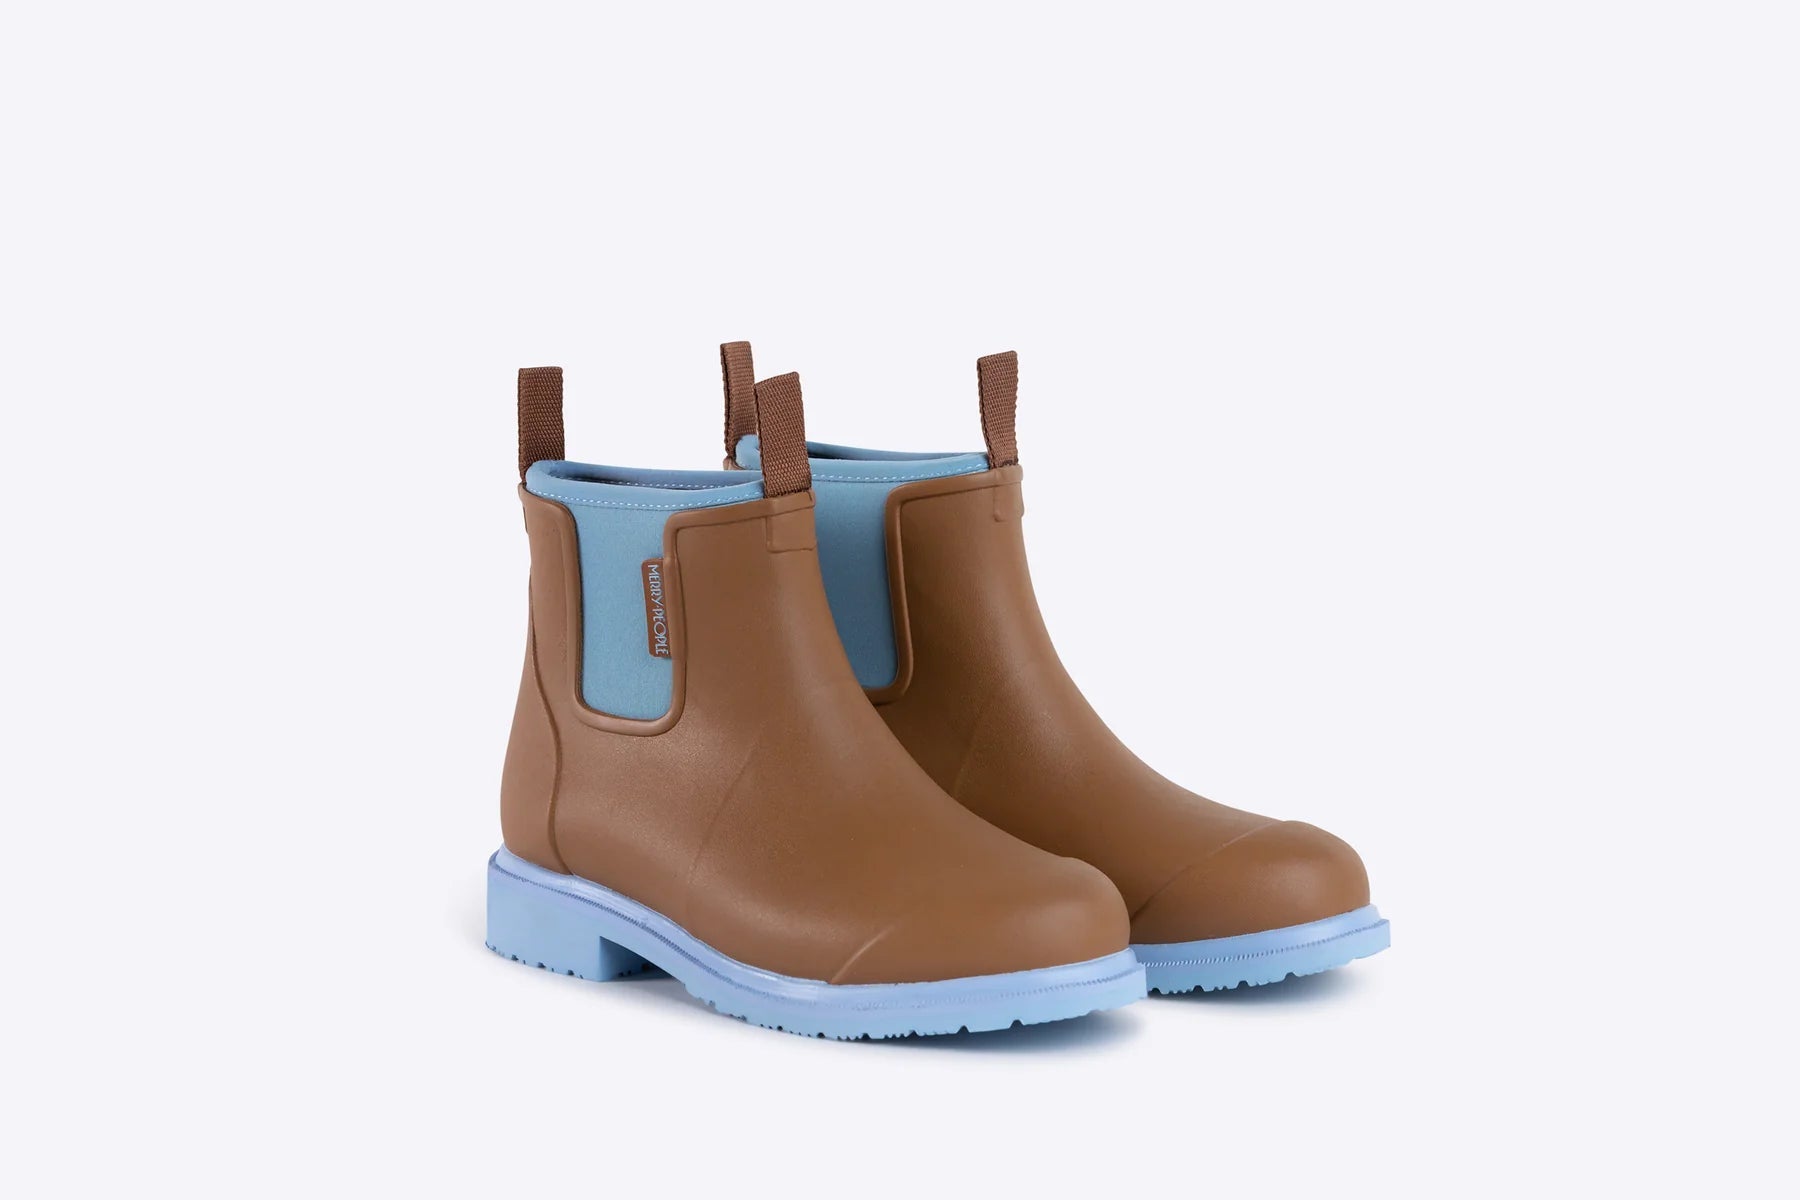 Bobbi Gumboots (Extra Traction) - Merry People shoes Merry People 